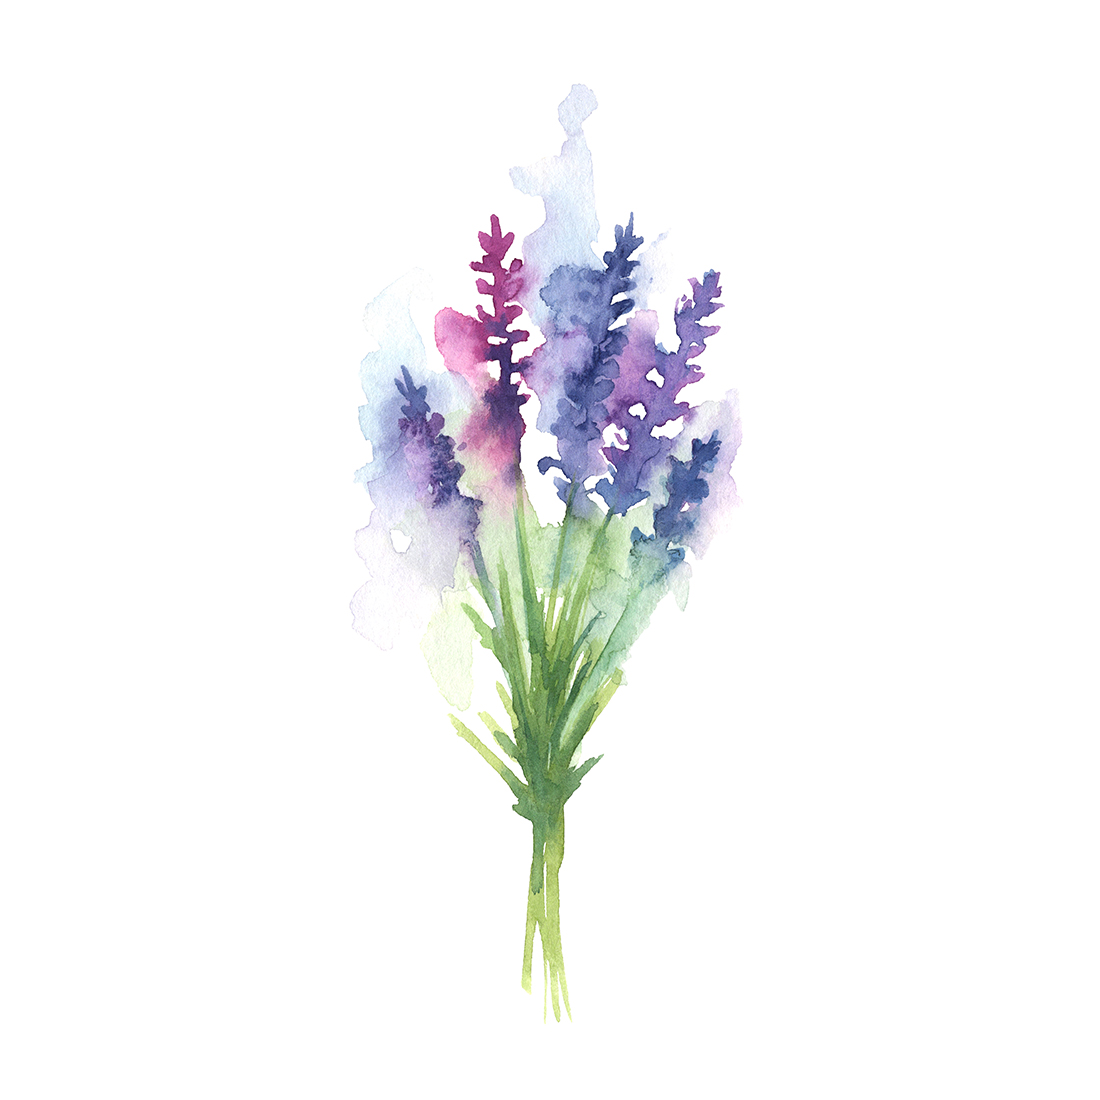 Watercolor Lavender. Collection Of Backgrounds And Illustrations image preview.